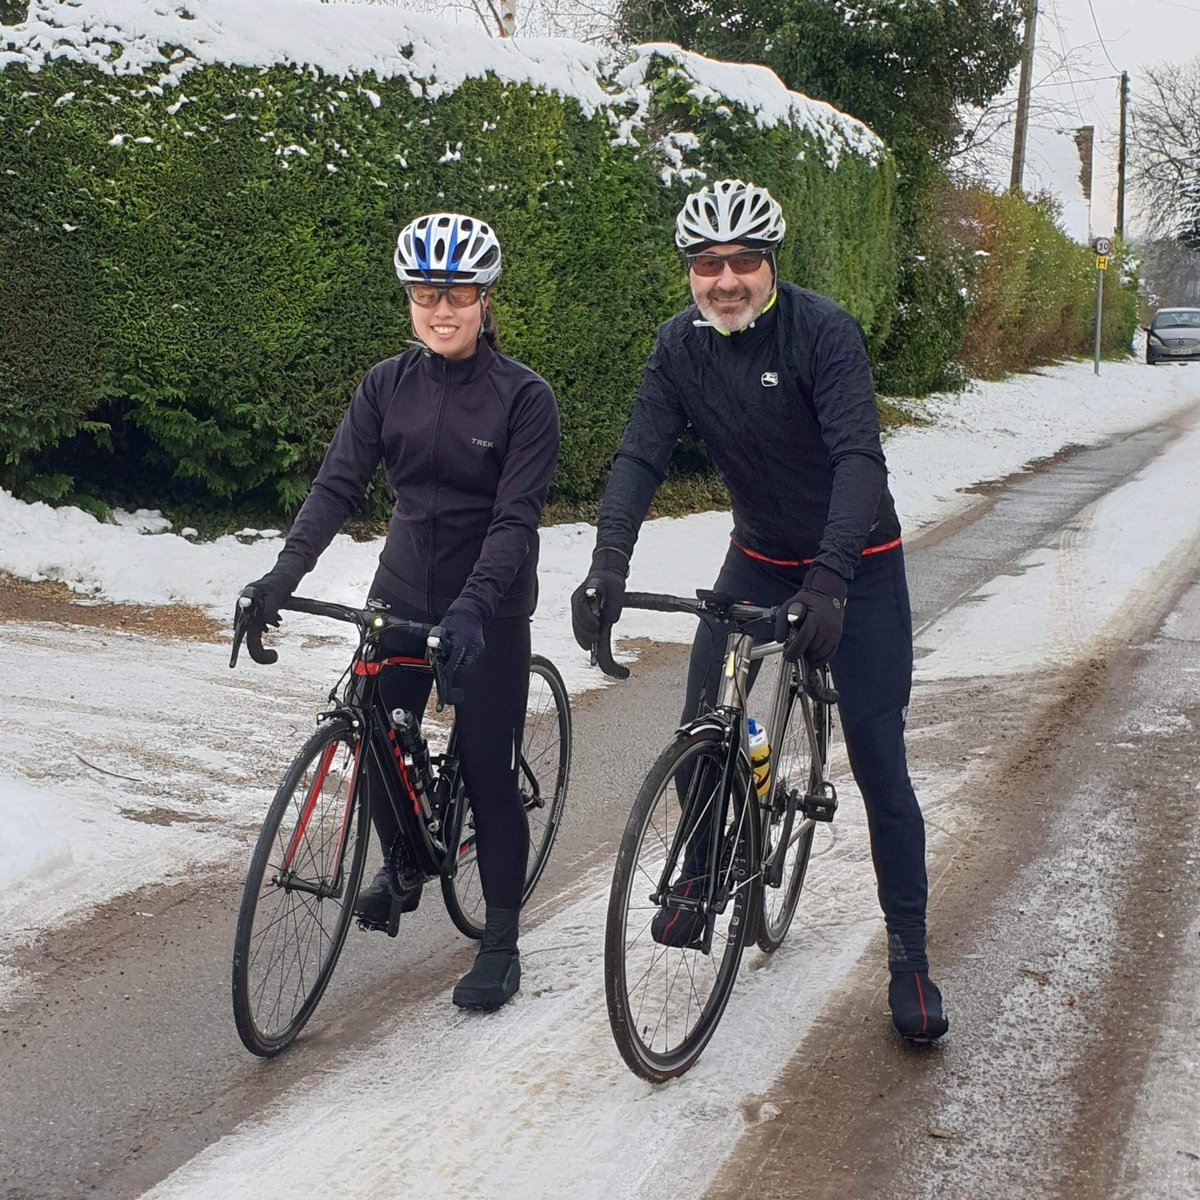 BRCC members Olivia Taylor & @NickHickman16 braved the freezing elements! -Just twenty yards on the white stuff then stuck to gritted roads after that. Orders for the day were for hot choc & cake after.(Olivia is on leave from 7th Parachute Regiment) #BedsRoadCC #cyclinglife